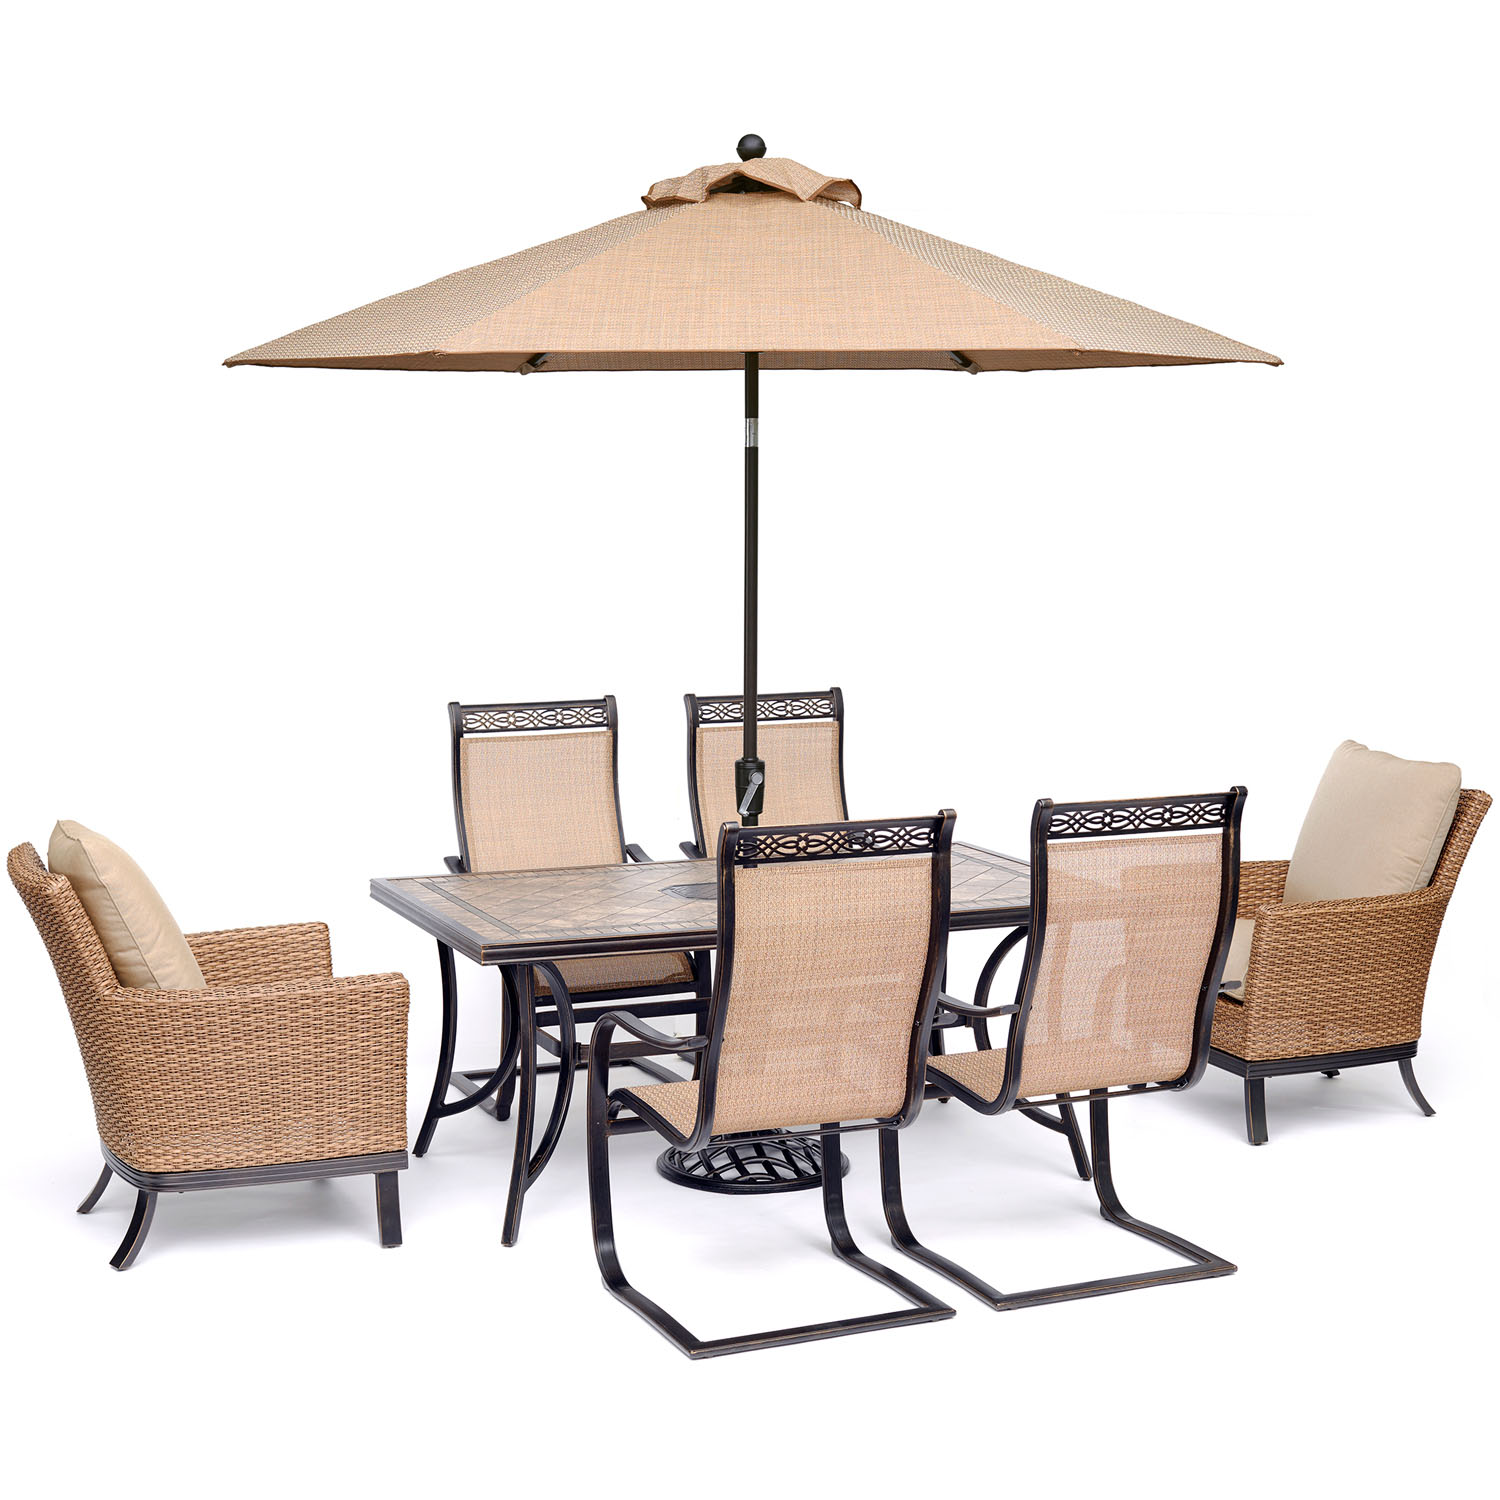 Hanover Monaco 7-Piece Patio Dining Set w/ 2 Woven Armchairs, 4 Sling C-Spring Chairs, 40" x 68" Tile-Top Table, 9-Ft Umbrella, Stand - image 1 of 7